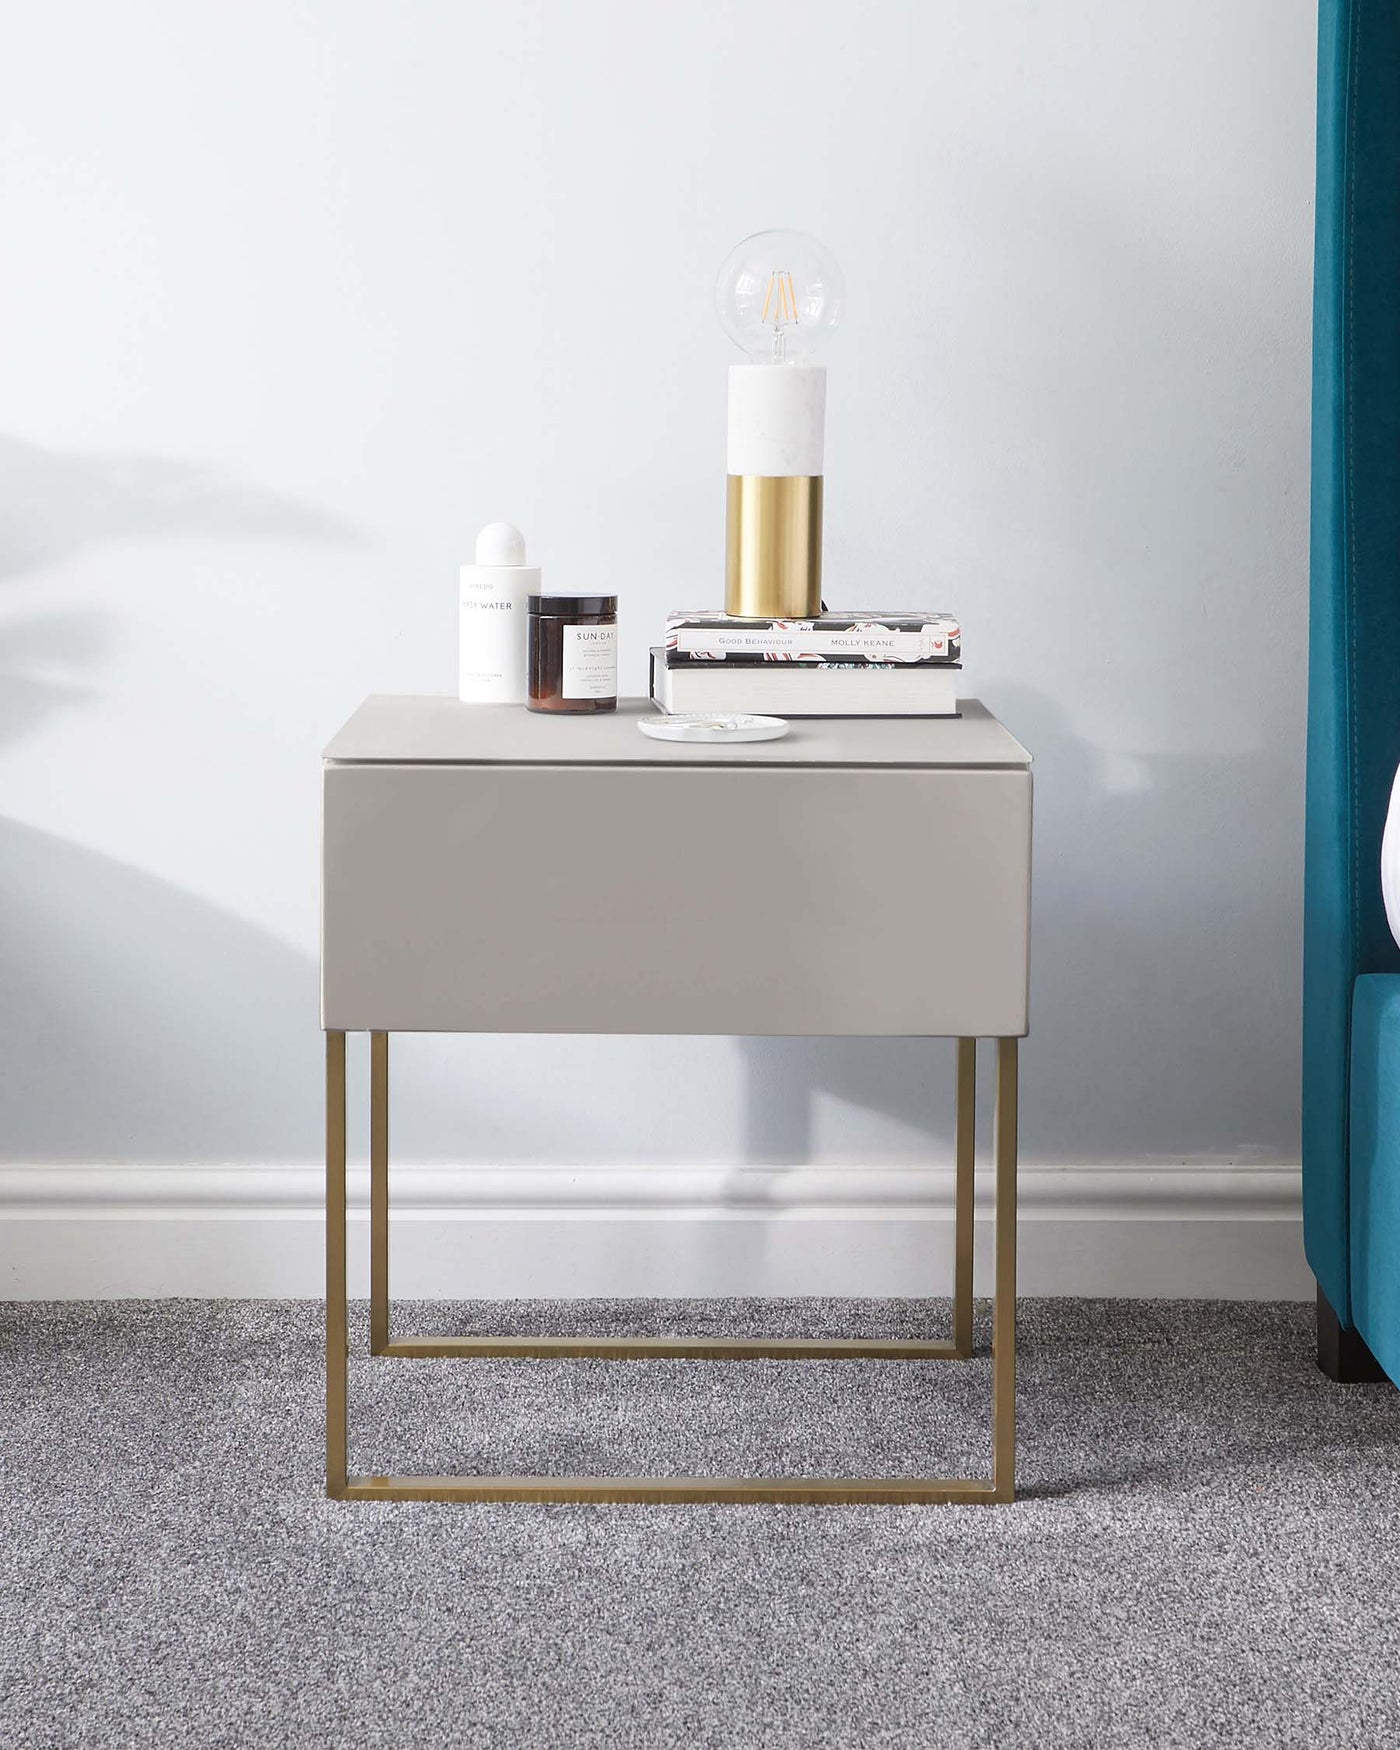 Modern minimalist nightstand with a smooth grey finish and sleek golden metal legs, styled with contemporary home accessories.